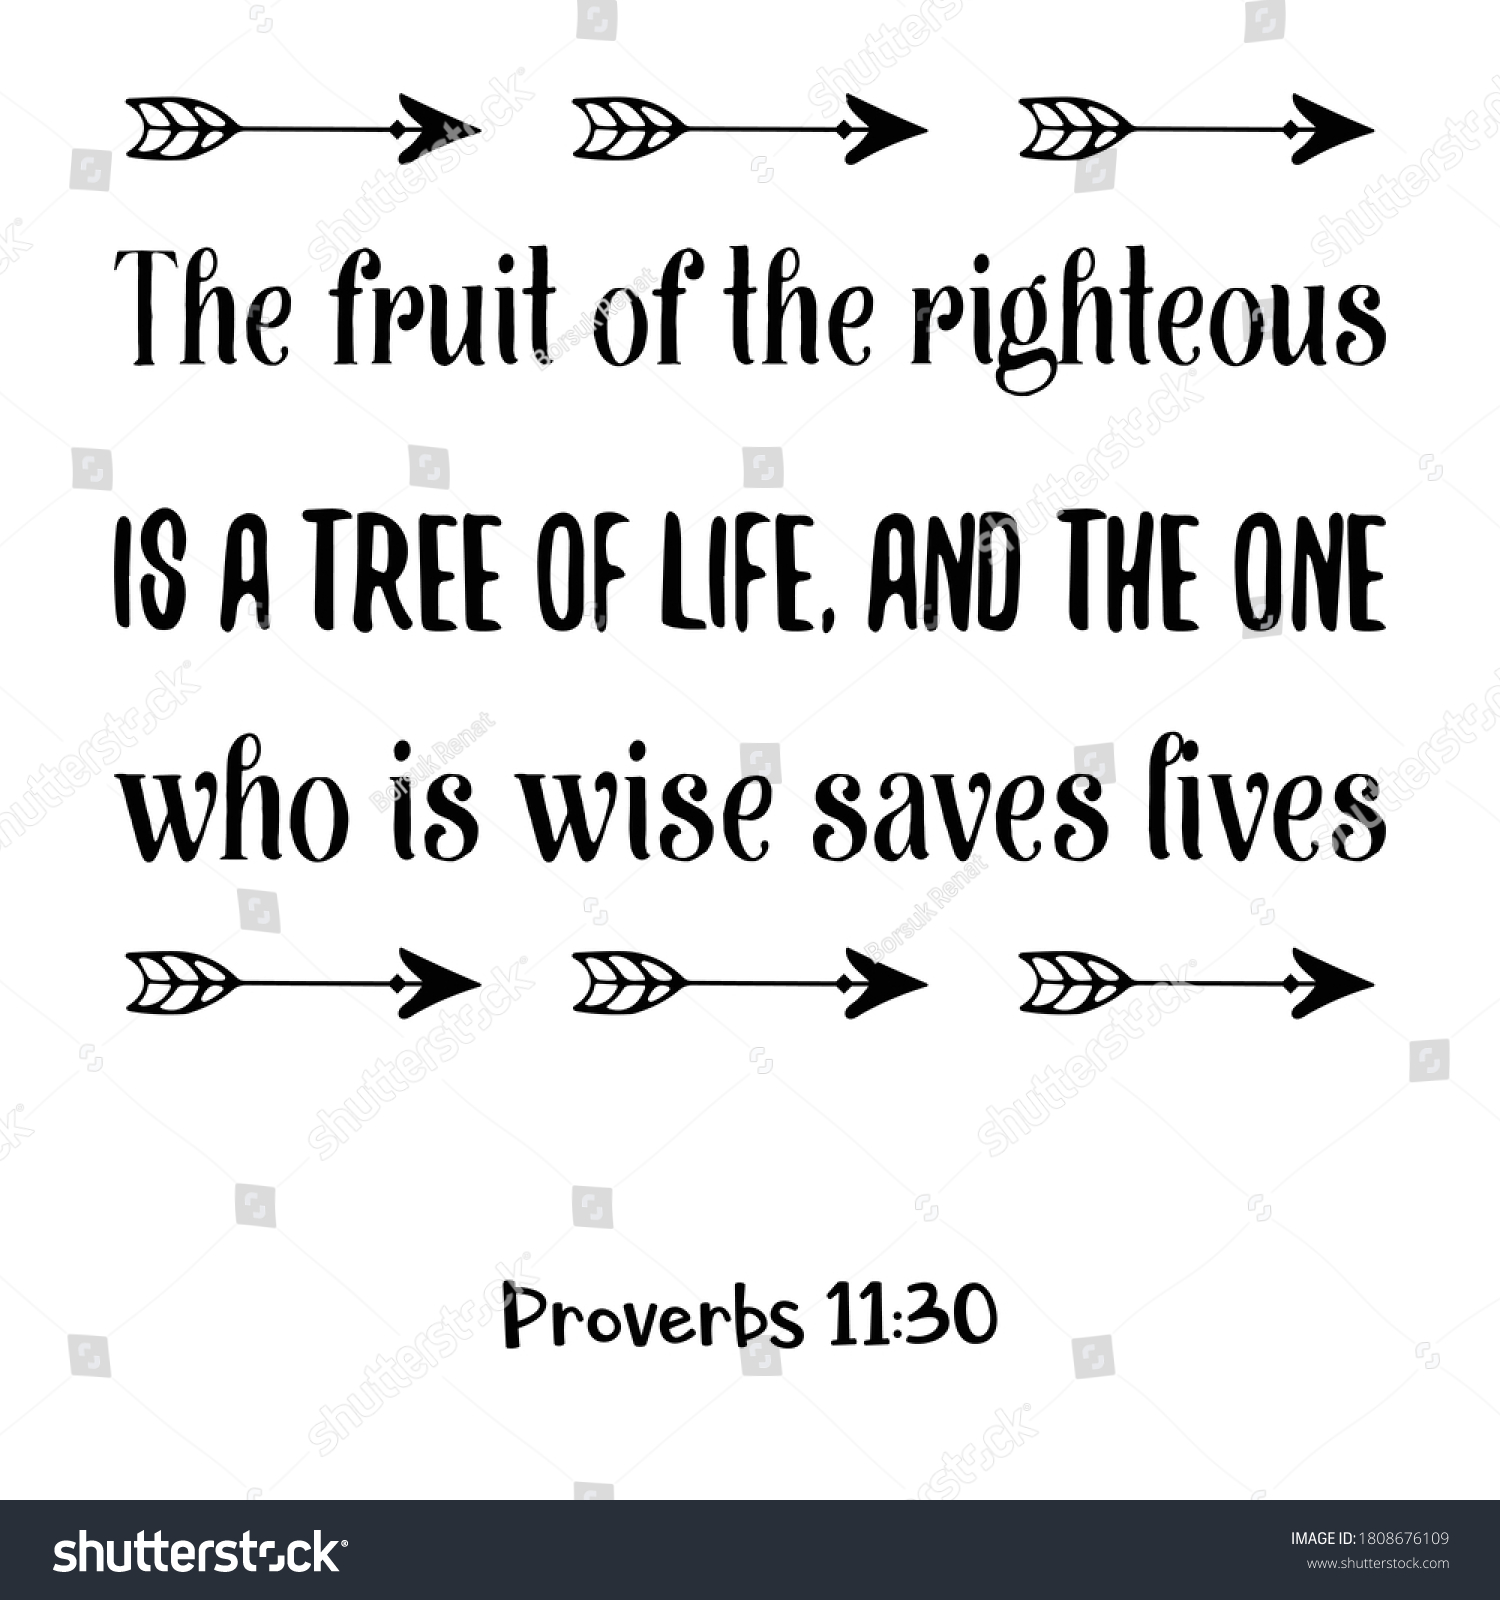 the-fruit-of-the-righteous-is-a-tree-of-life-royalty-free-stock